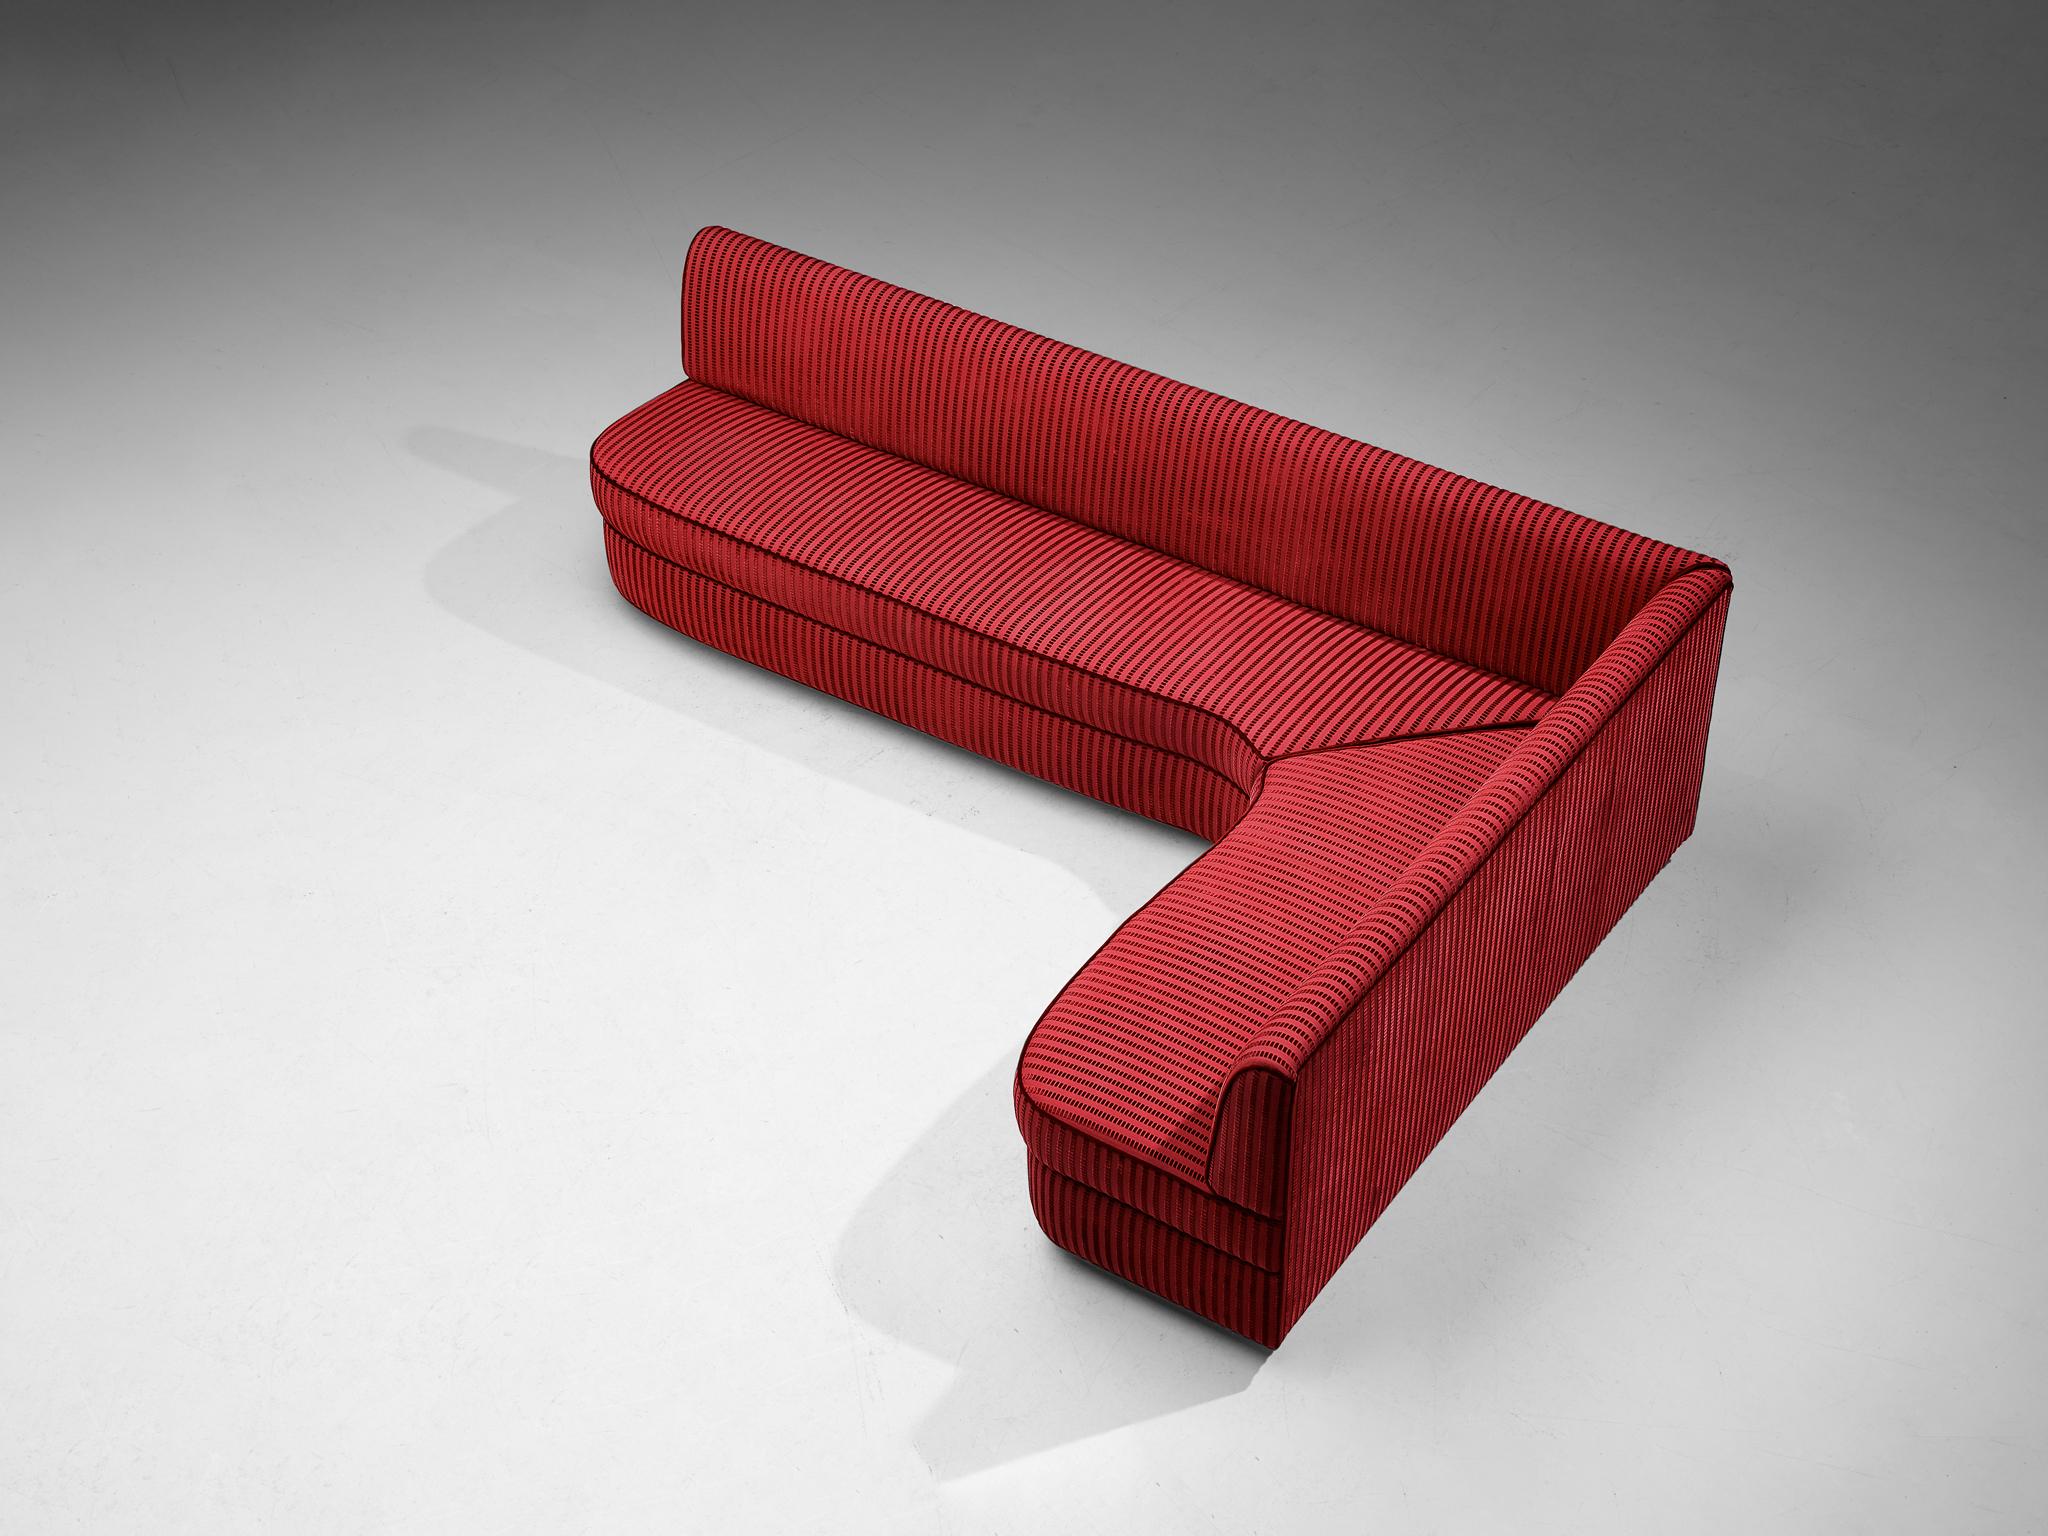 Corner sofa, fabric, velvet, lacquered wood, Italy, 1950s

This sofa of Italian origin has a cozy appeal and is characterized by a splendid construction. The body is upholstered in a red fabric adorned with velvet stripes that dominate the surface.